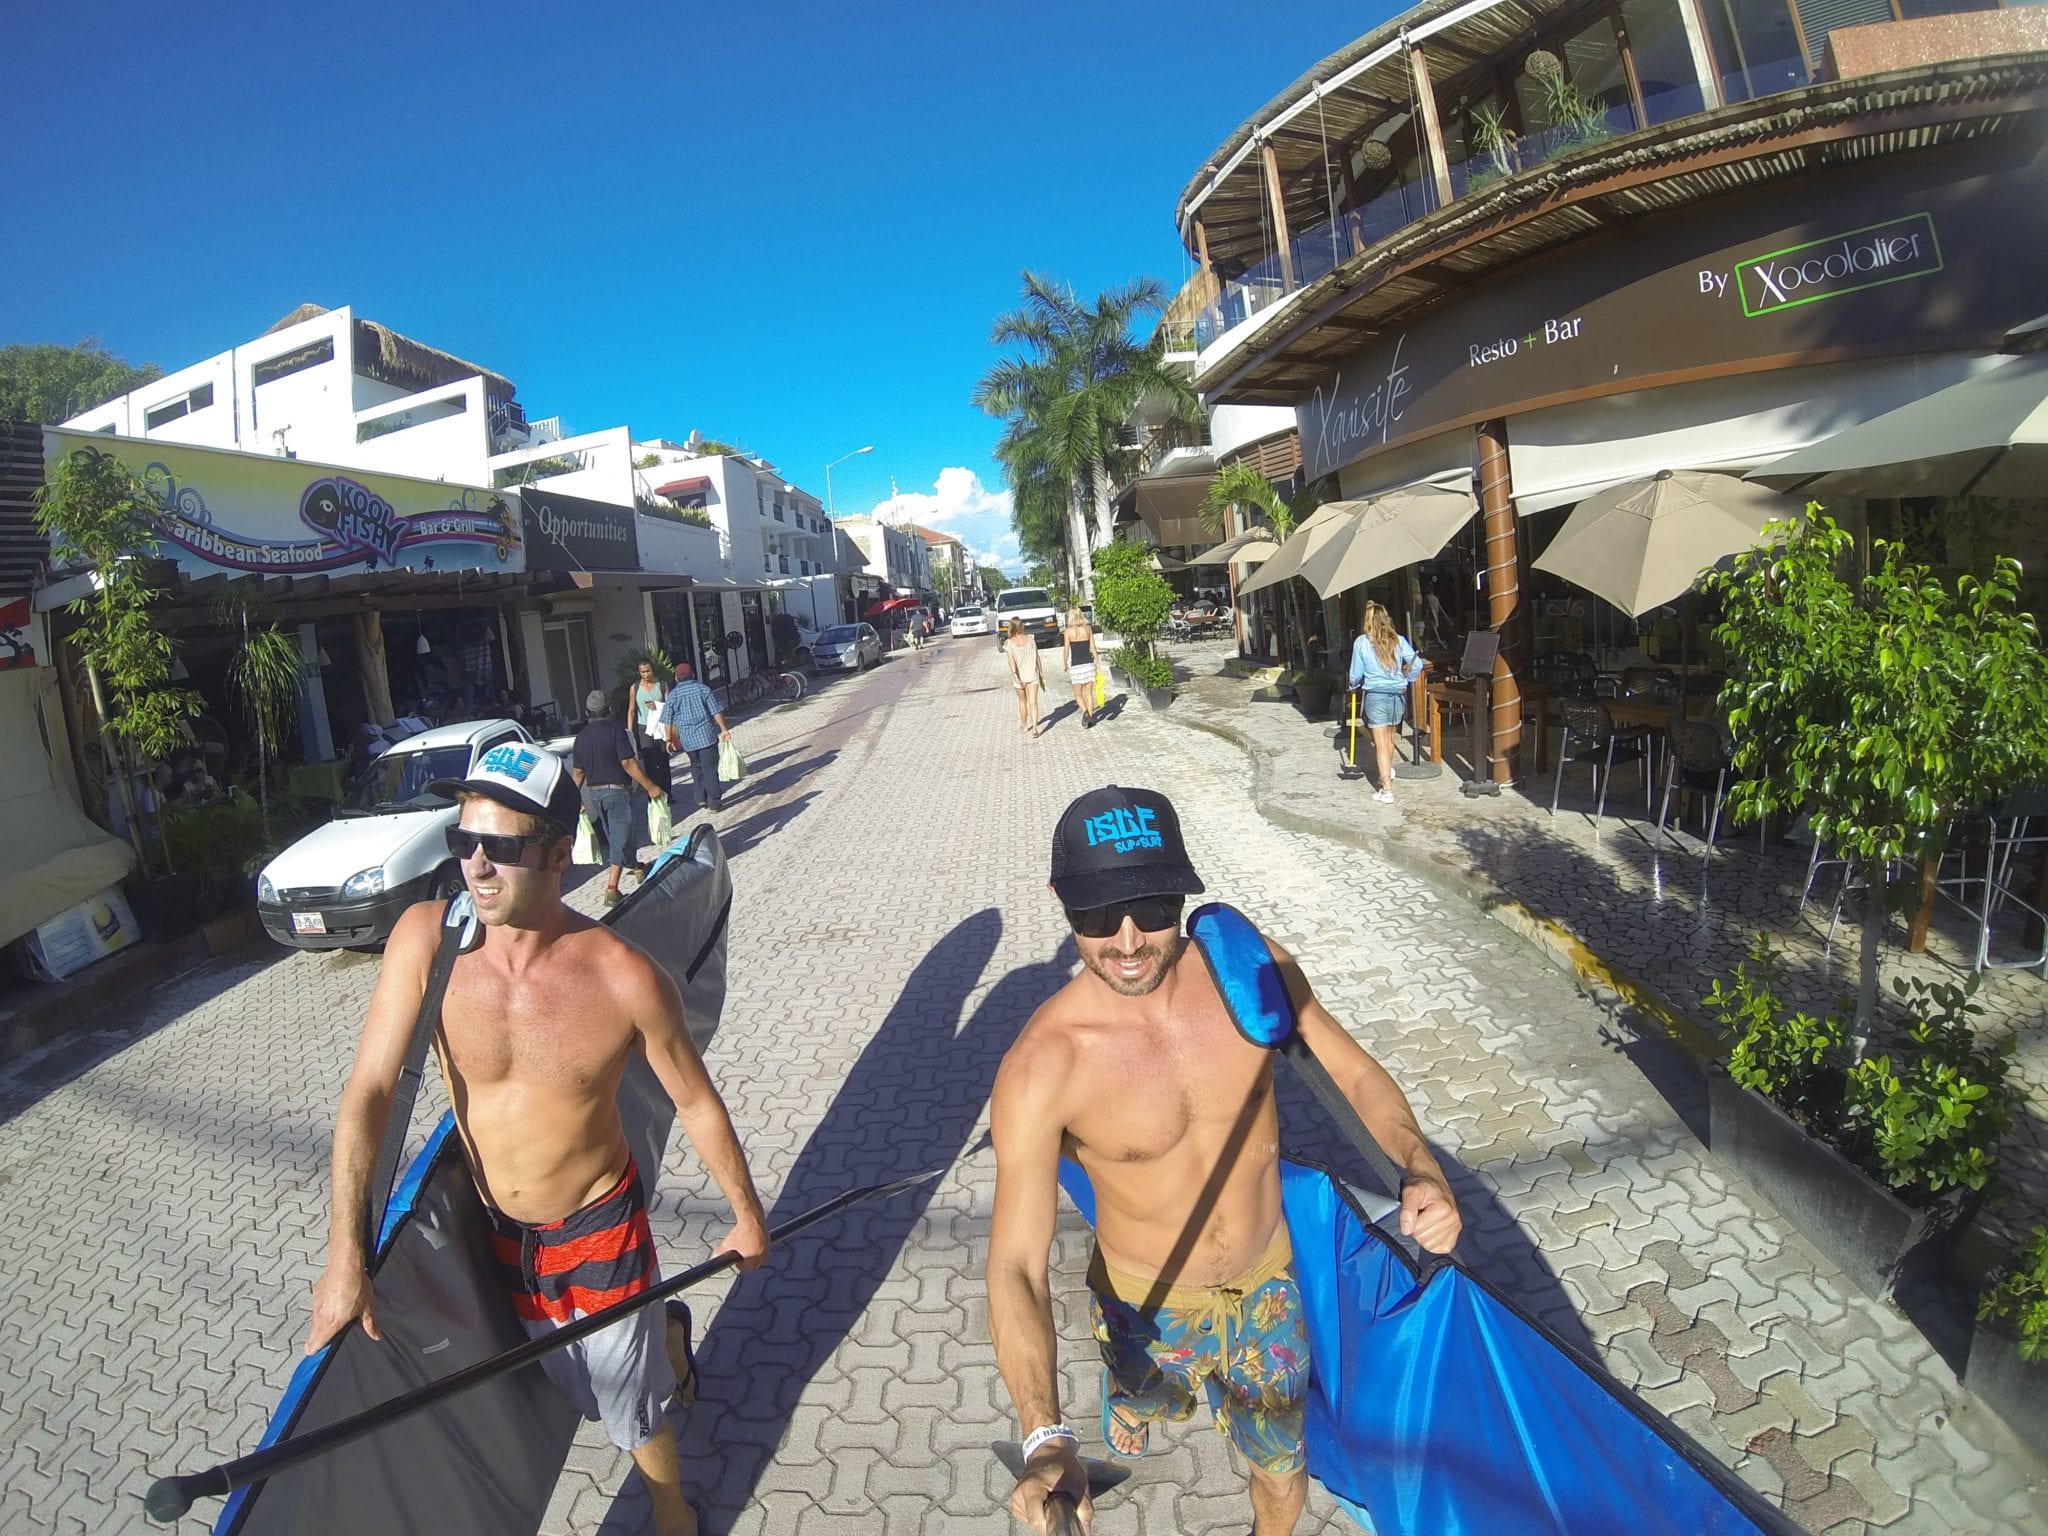 isle riders dirk and marc carry their isle paddle boards through the streets of playa del carmen